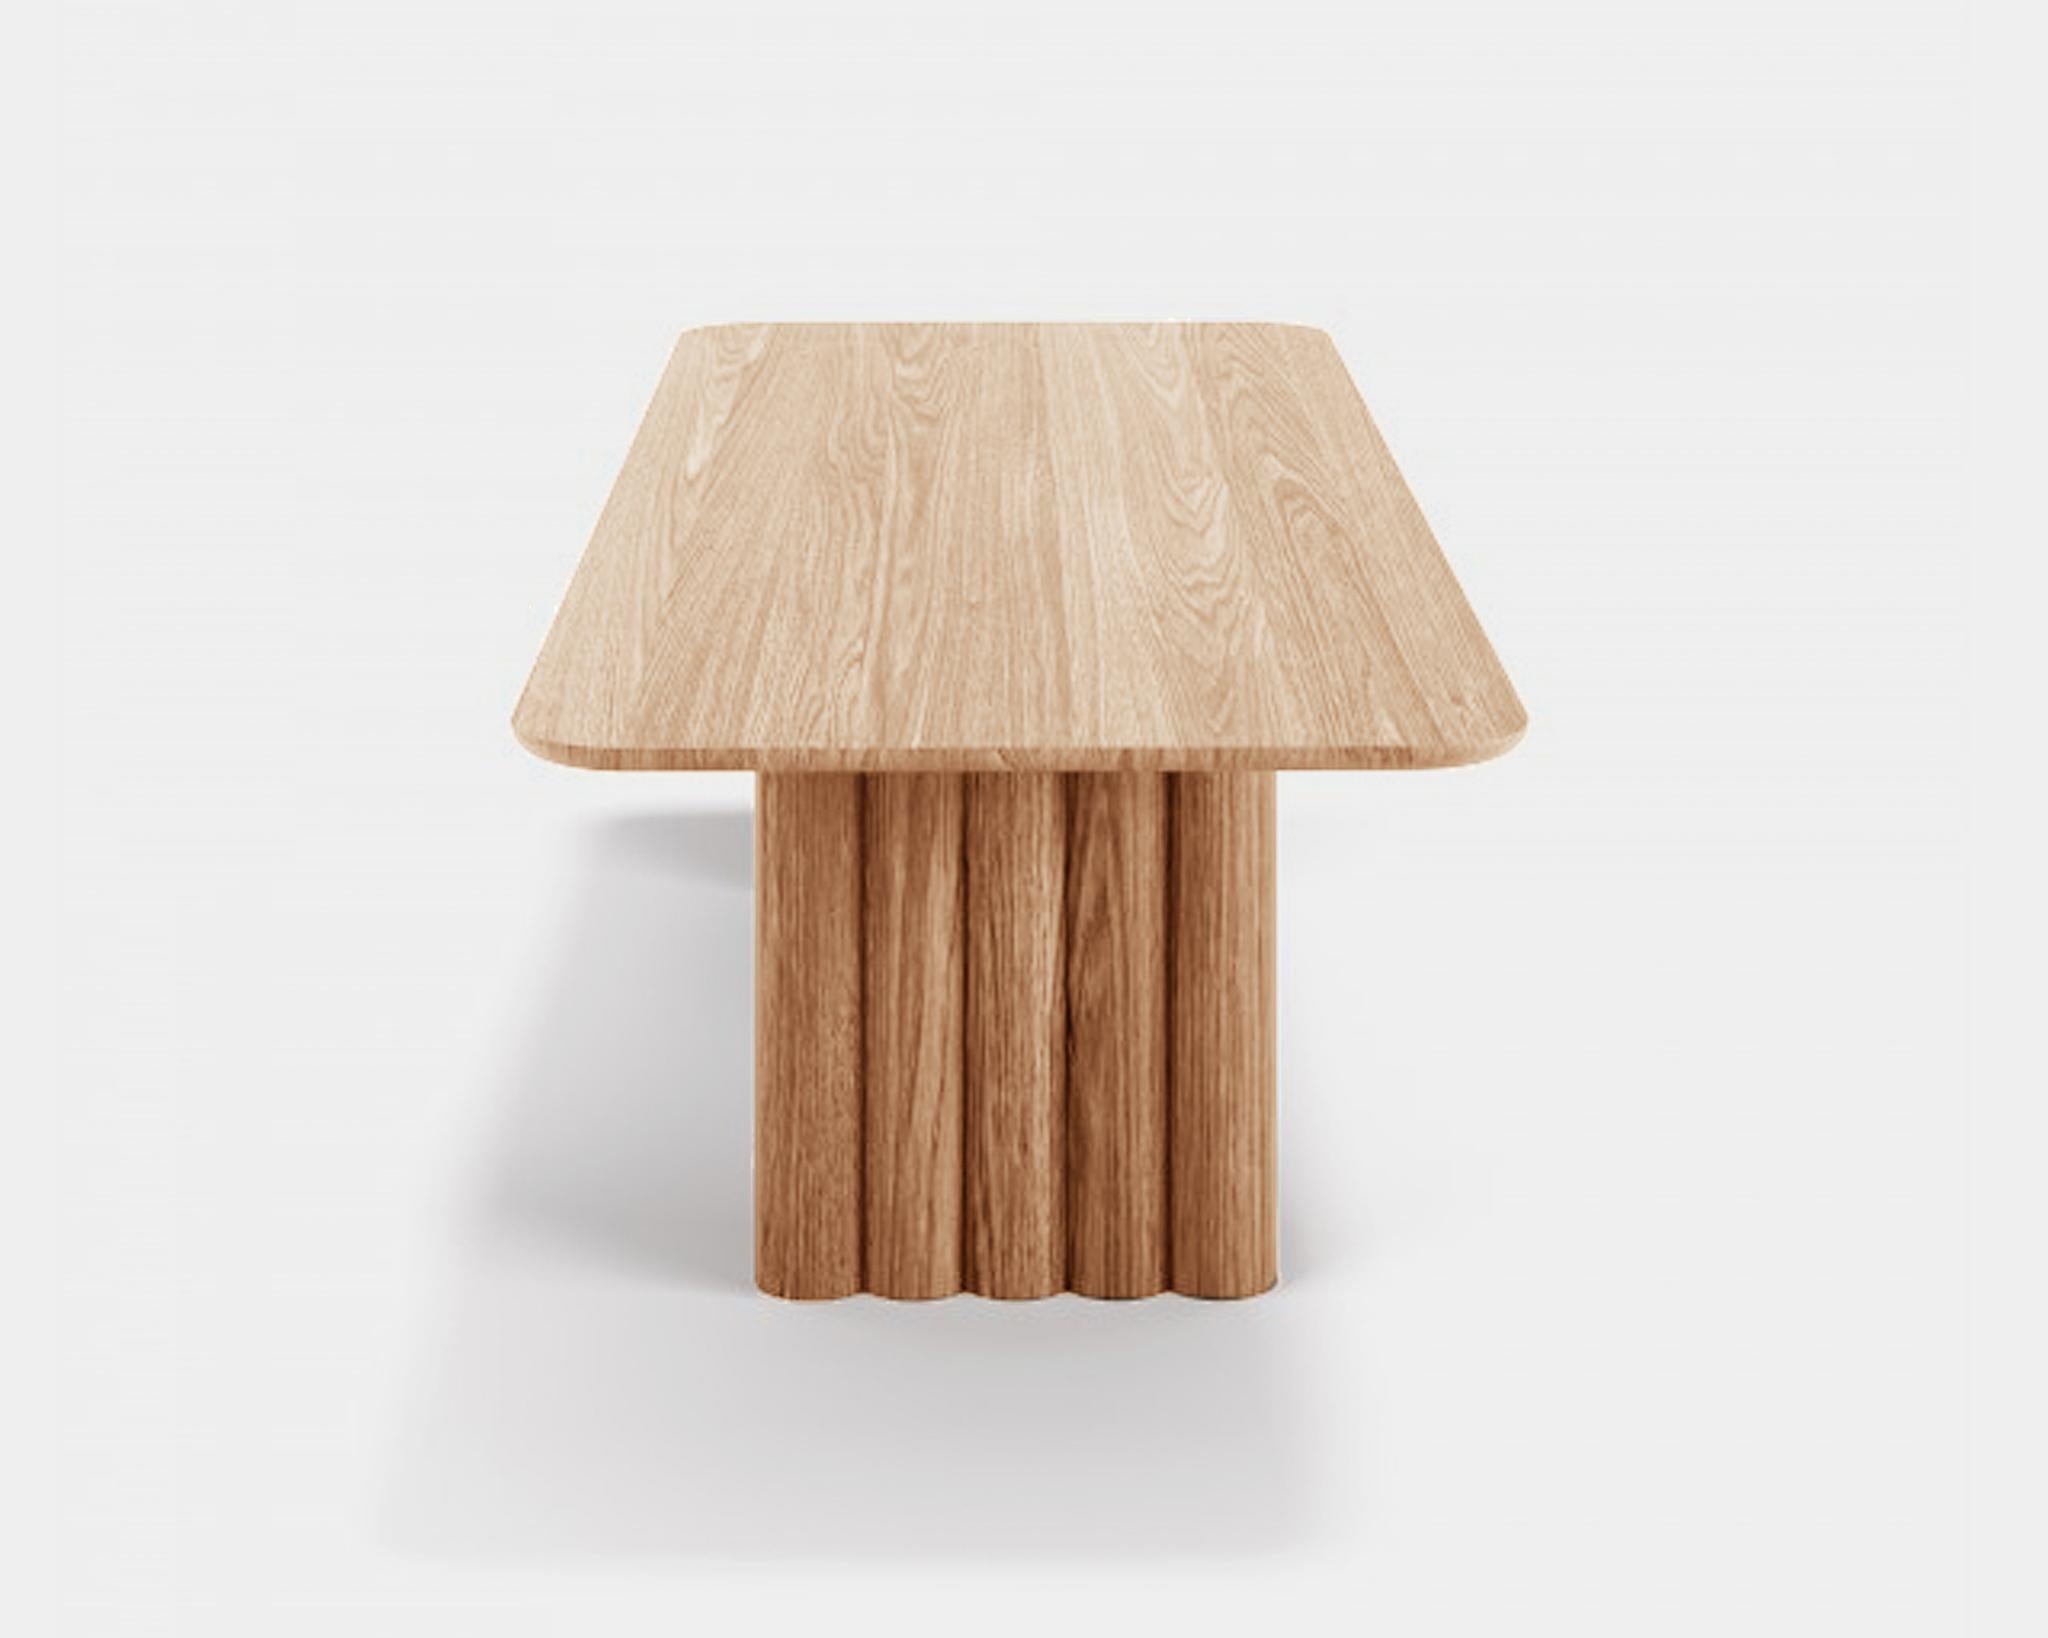 PLUSH dining table, rectangular table top, 370 cm.
Solid wood table top and legs. Handmade in Denmark. 
Signed by Jacob Plejdrup for DK3

Table's height: 72 or 74 cm
Sold model: 
Smoked Oak
Legs Thickness: 130 mm
Table top Thickness: 30 mm

Table